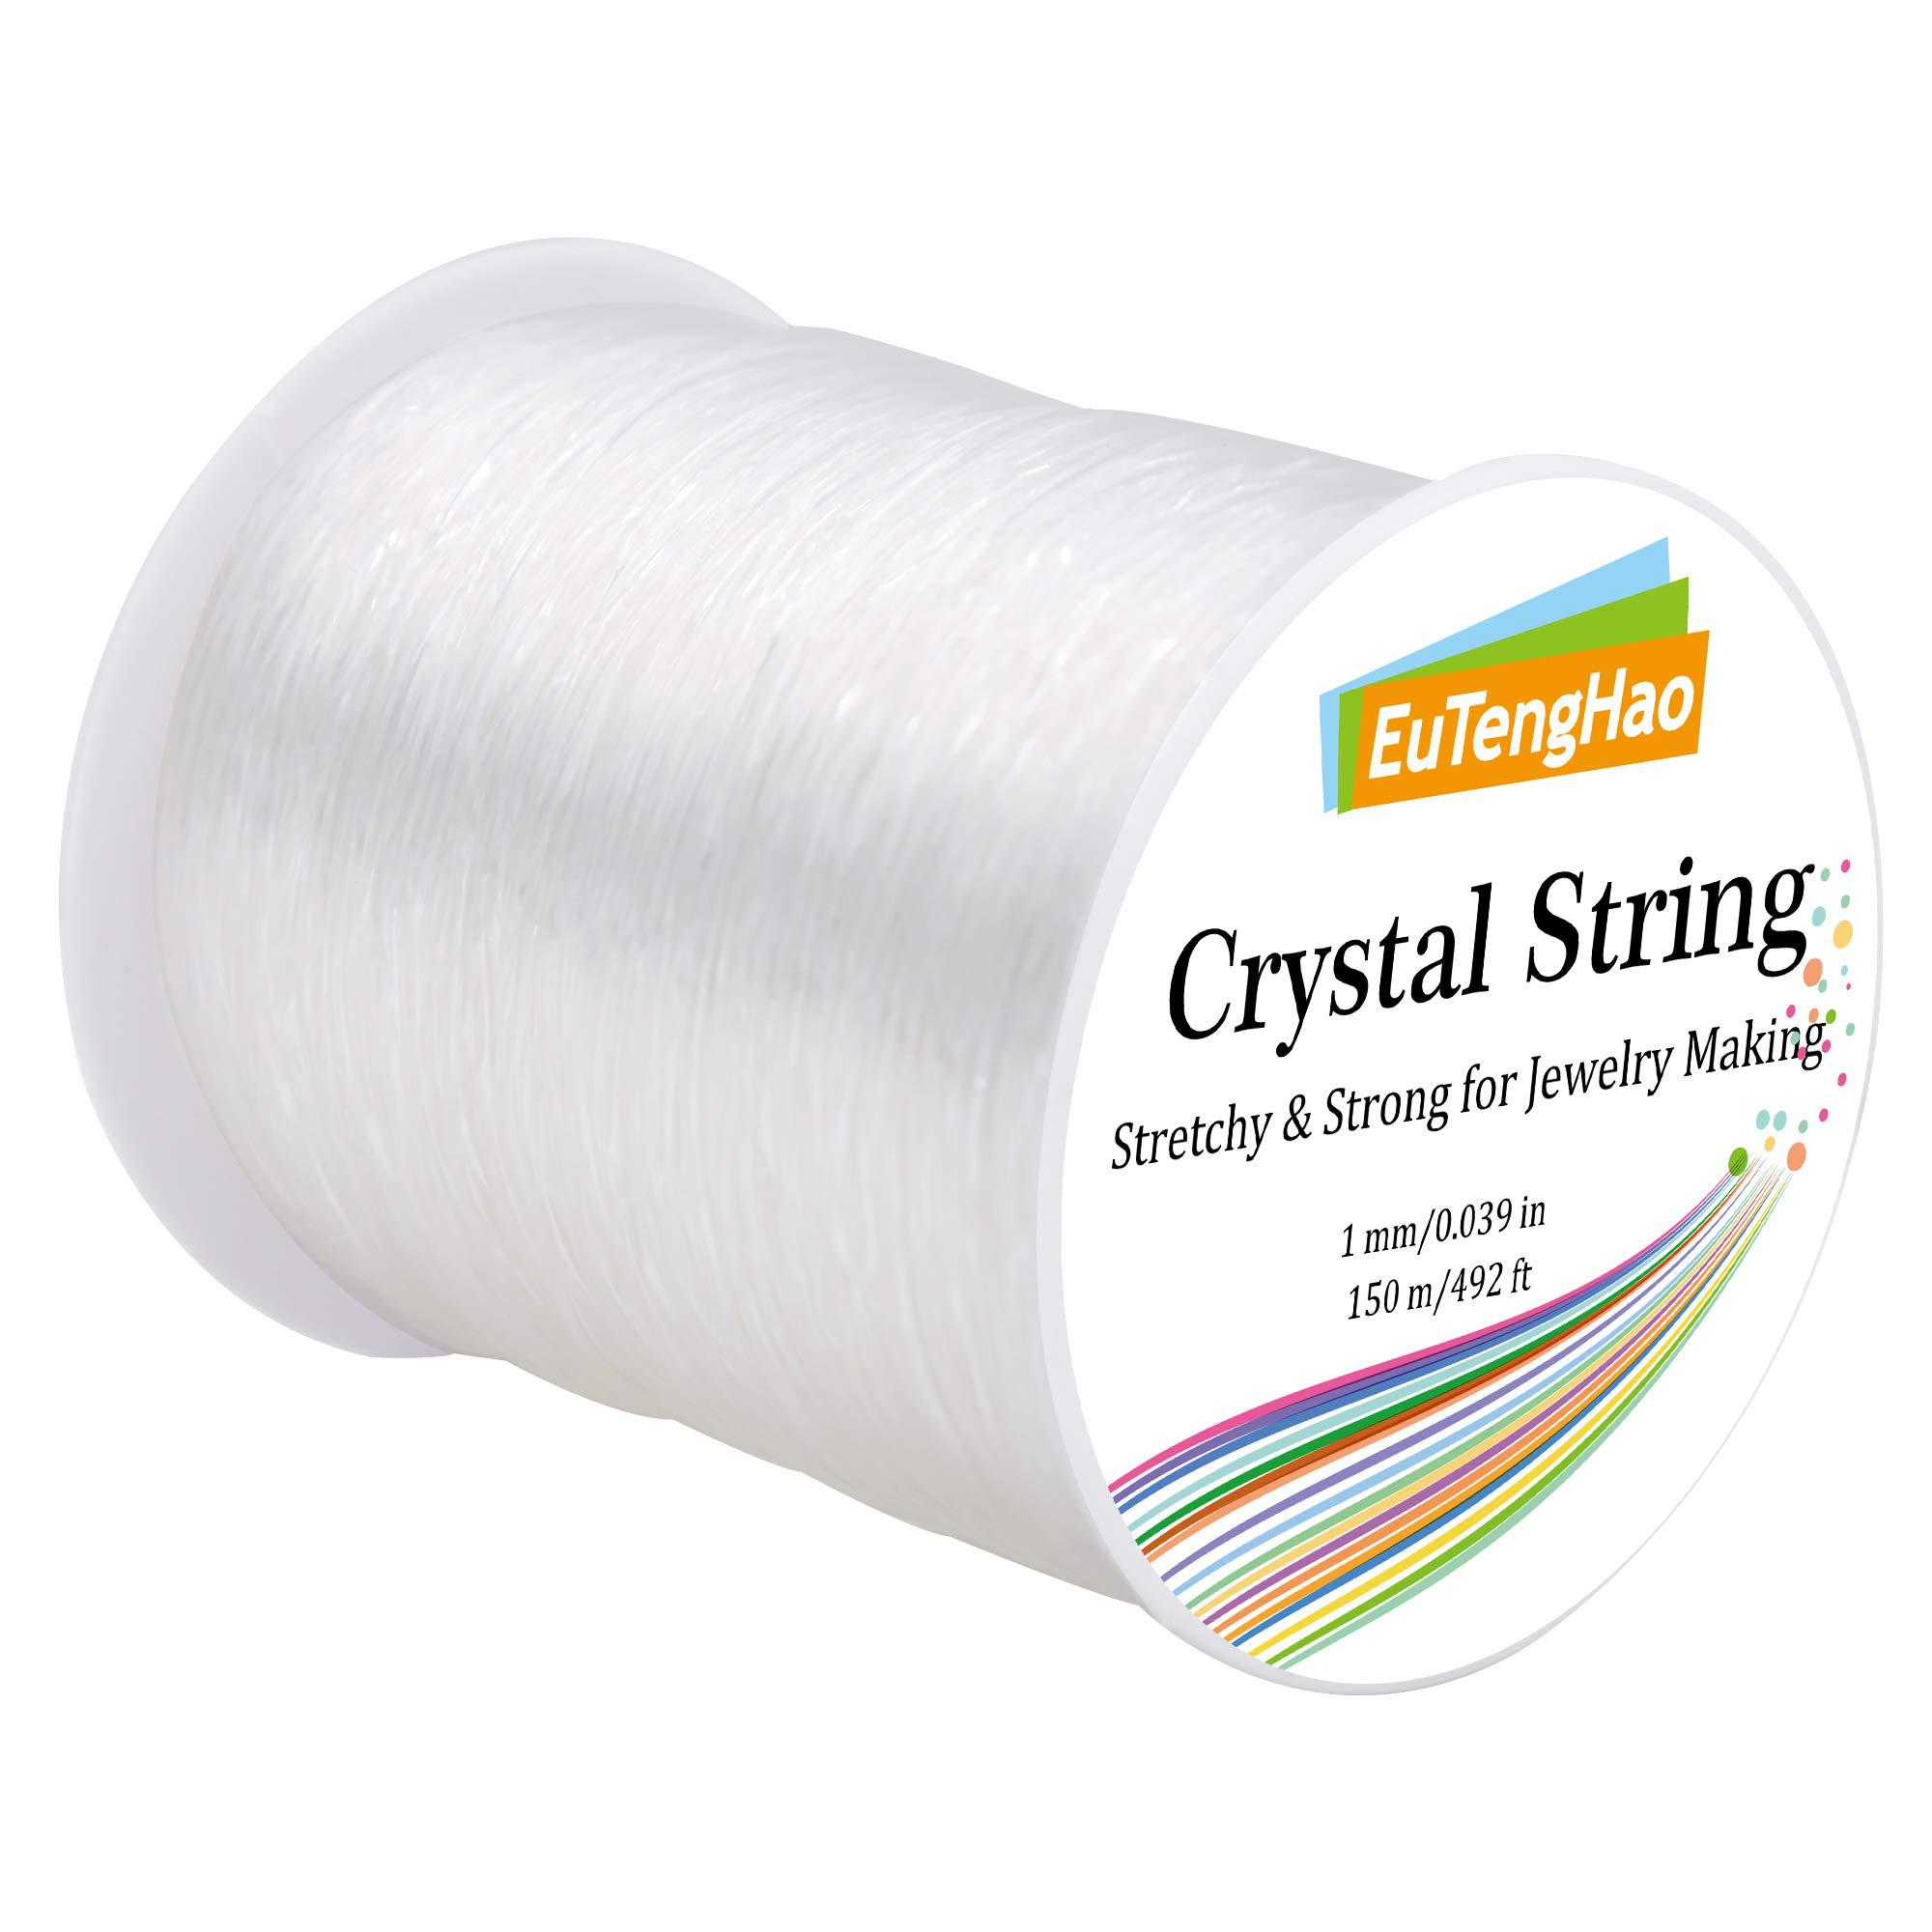 EuTengHao eutenghao 1mm crystal string elastic string for bracelets,150m/492ft  clear stretchy string for bracelets,beads stretch cord f